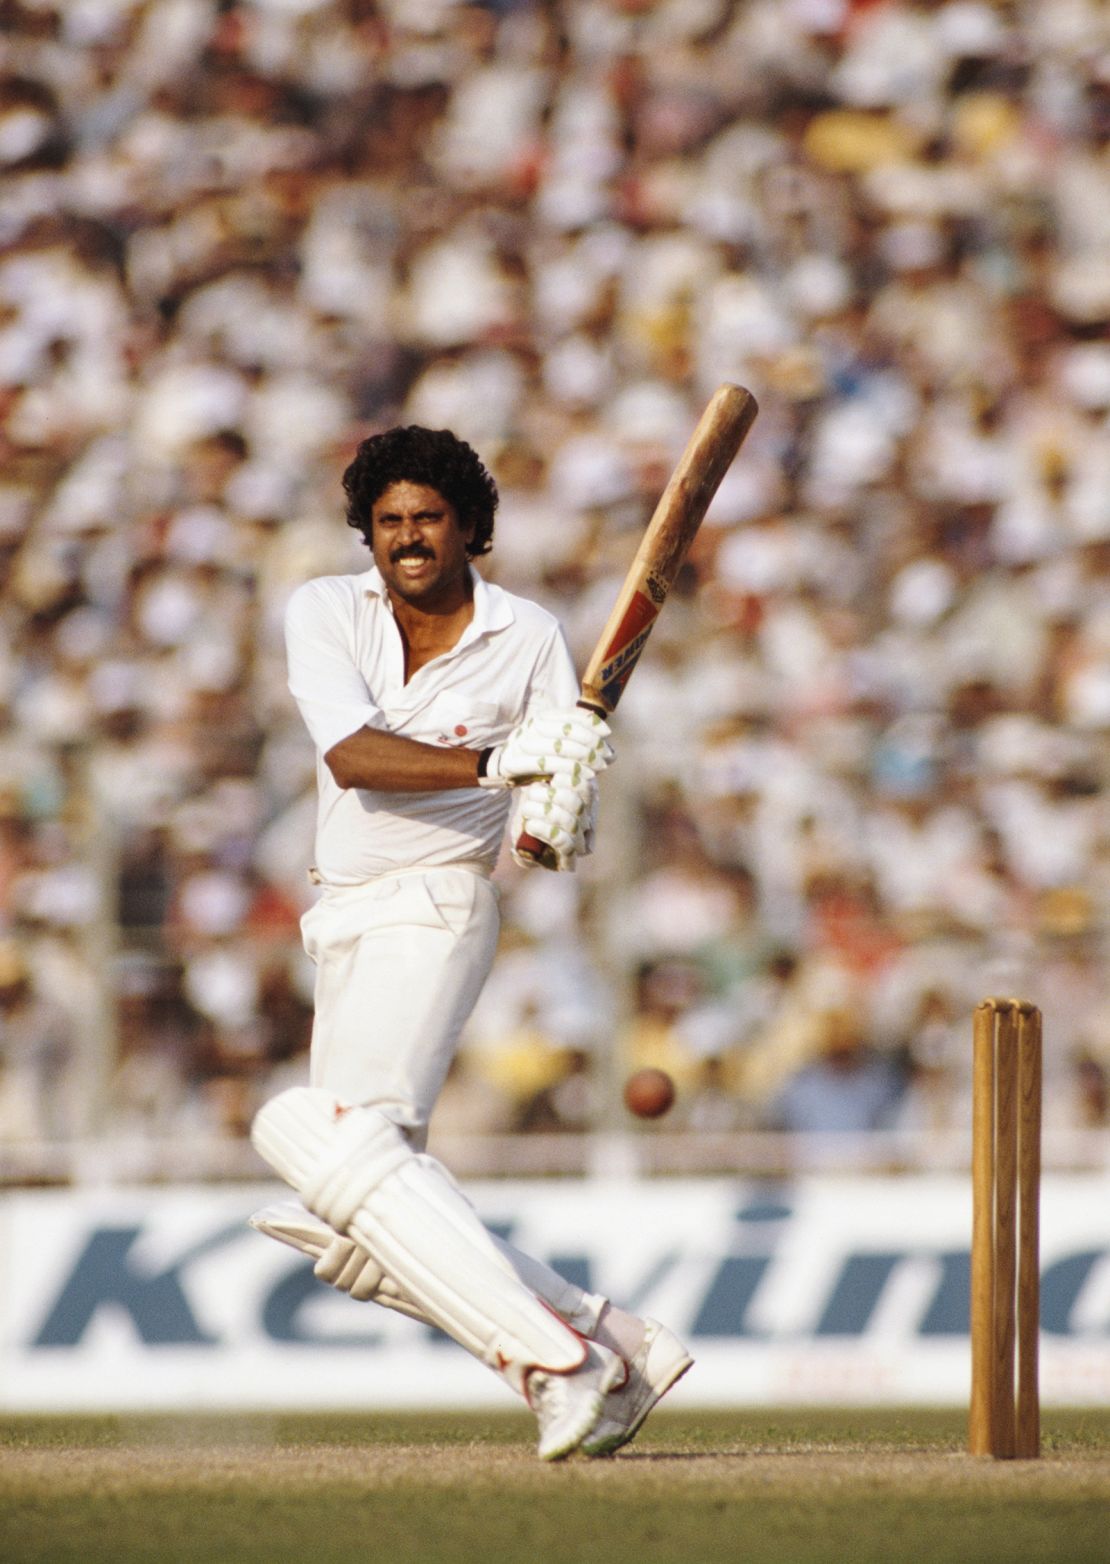 Dev is one of India's most revered cricketers, and captained the national team to World Cup victory in 1983.